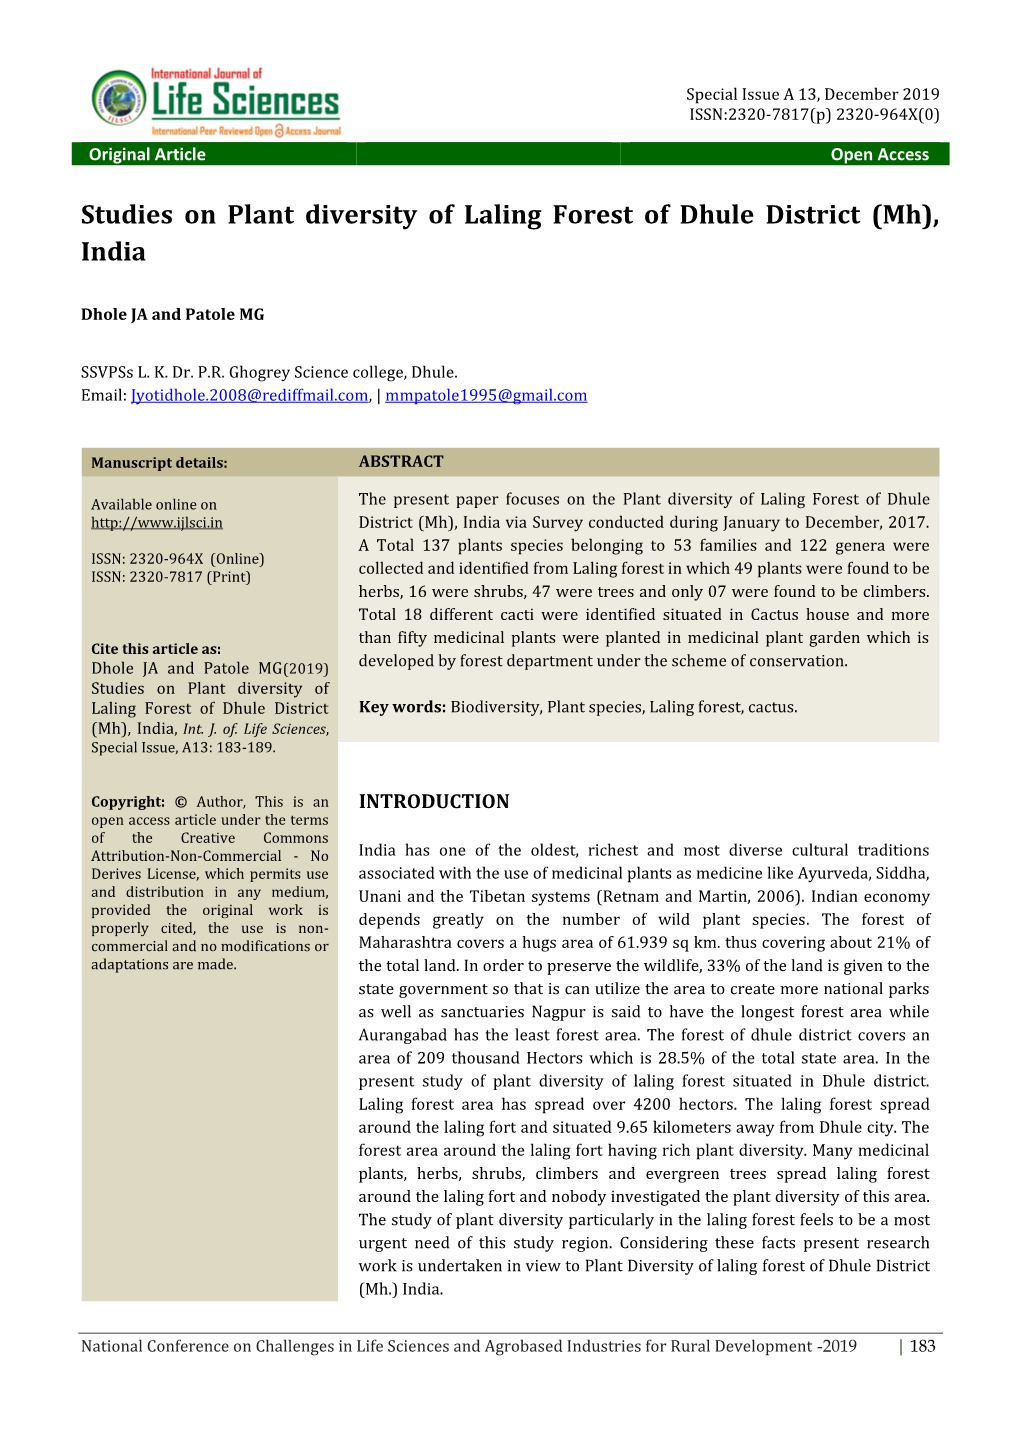 Studies on Plant Diversity of Laling Forest of Dhule District (Mh), India